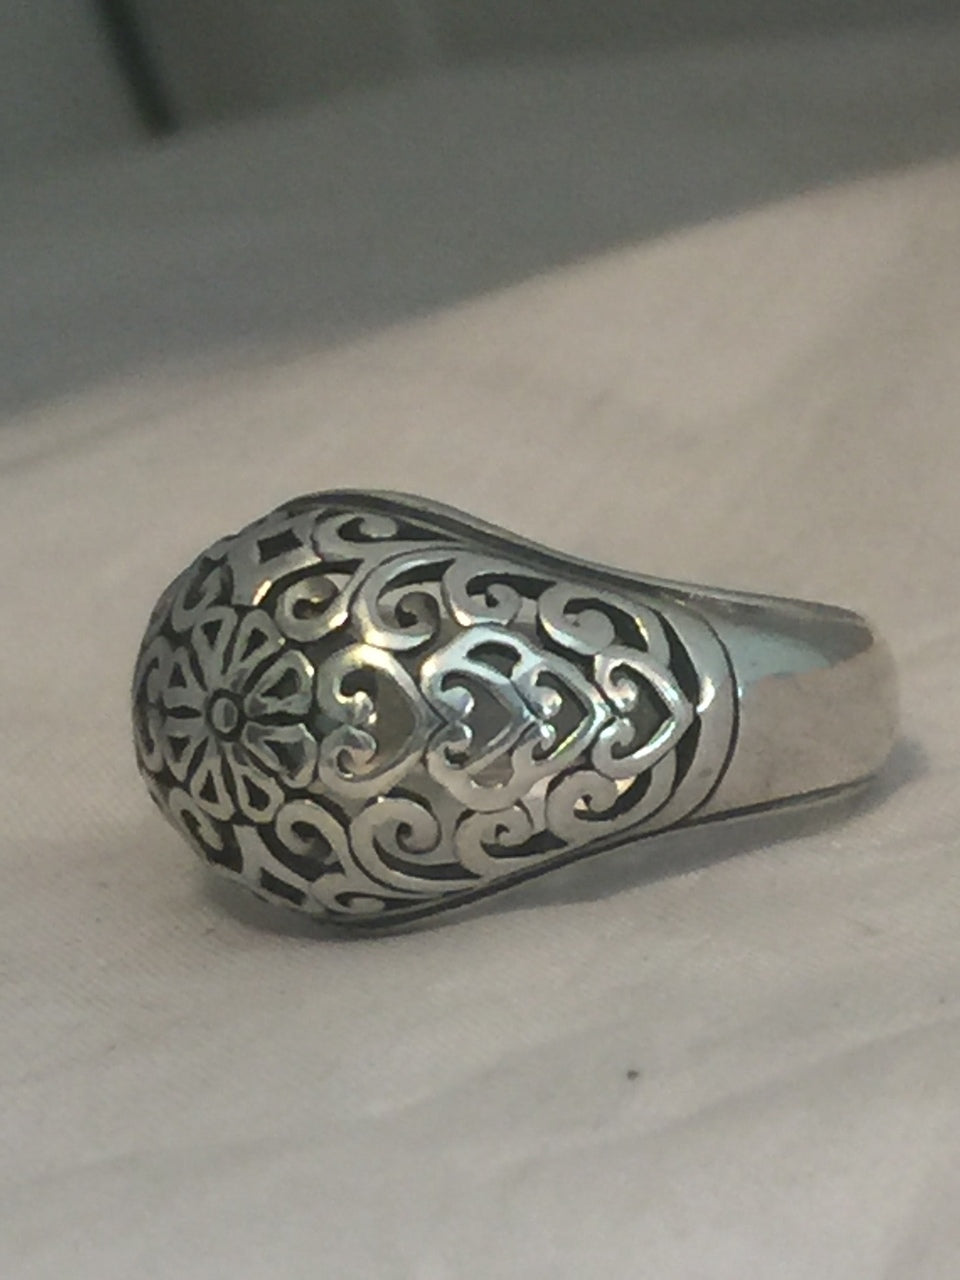 Vintage Sterling Silver Filigree Bubble Dome Ring Size 8.75  6g